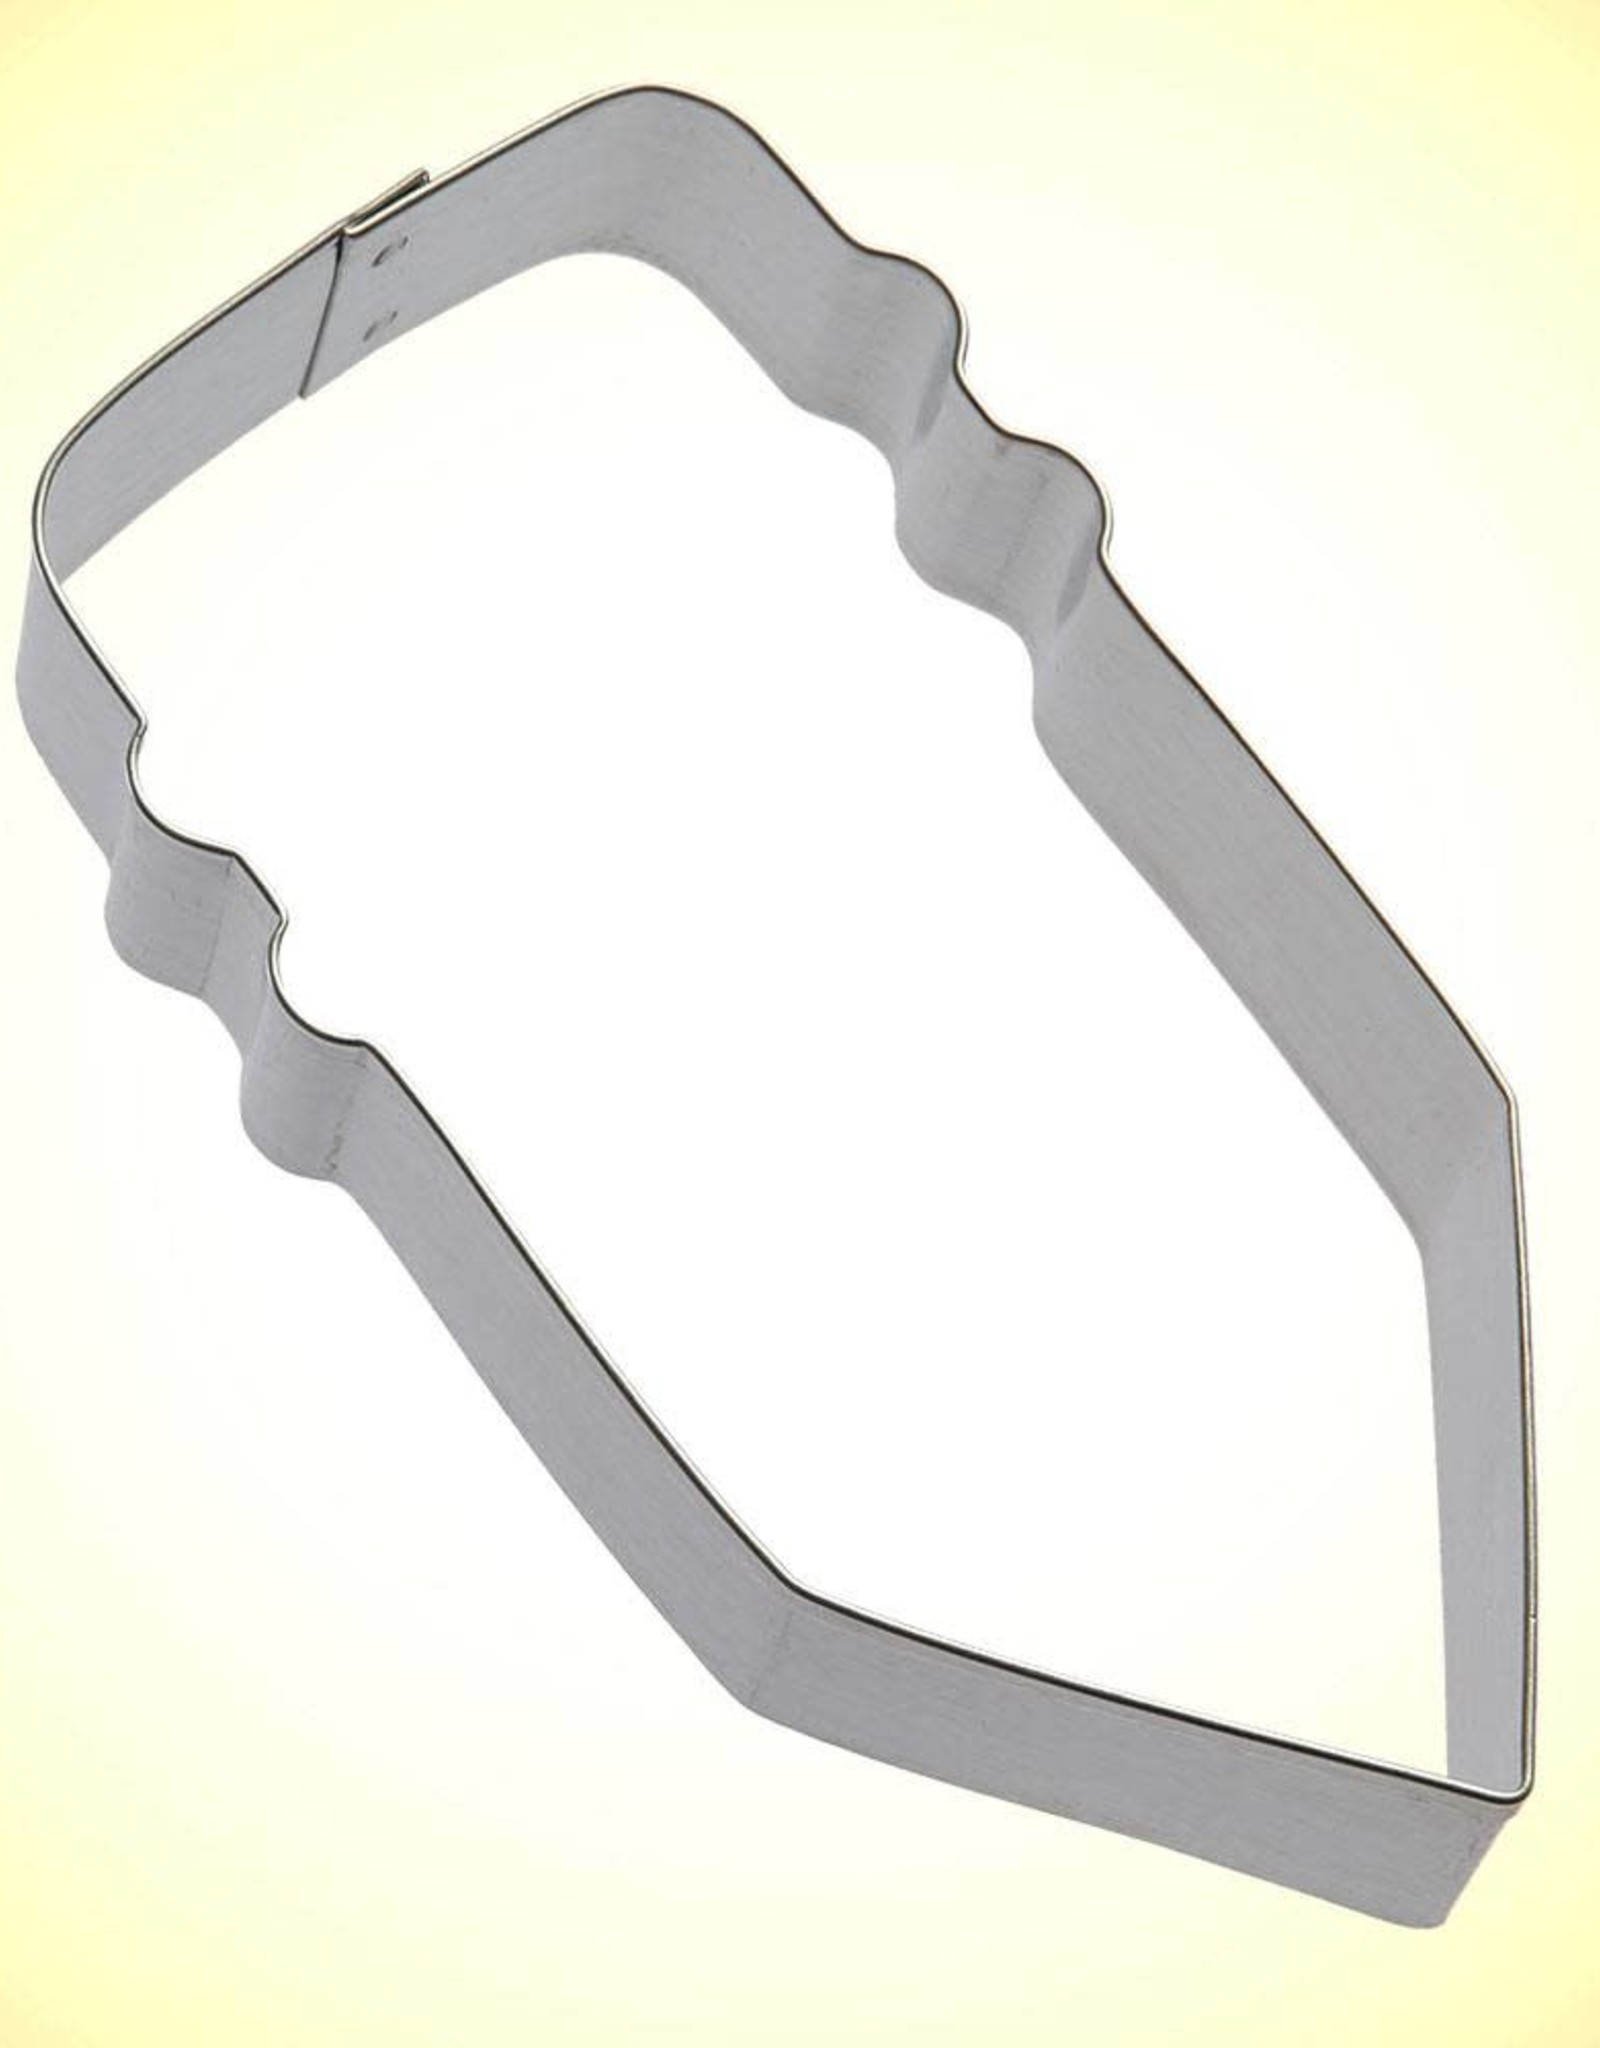 Chunky Pencil Cookie Cutter (4.5")